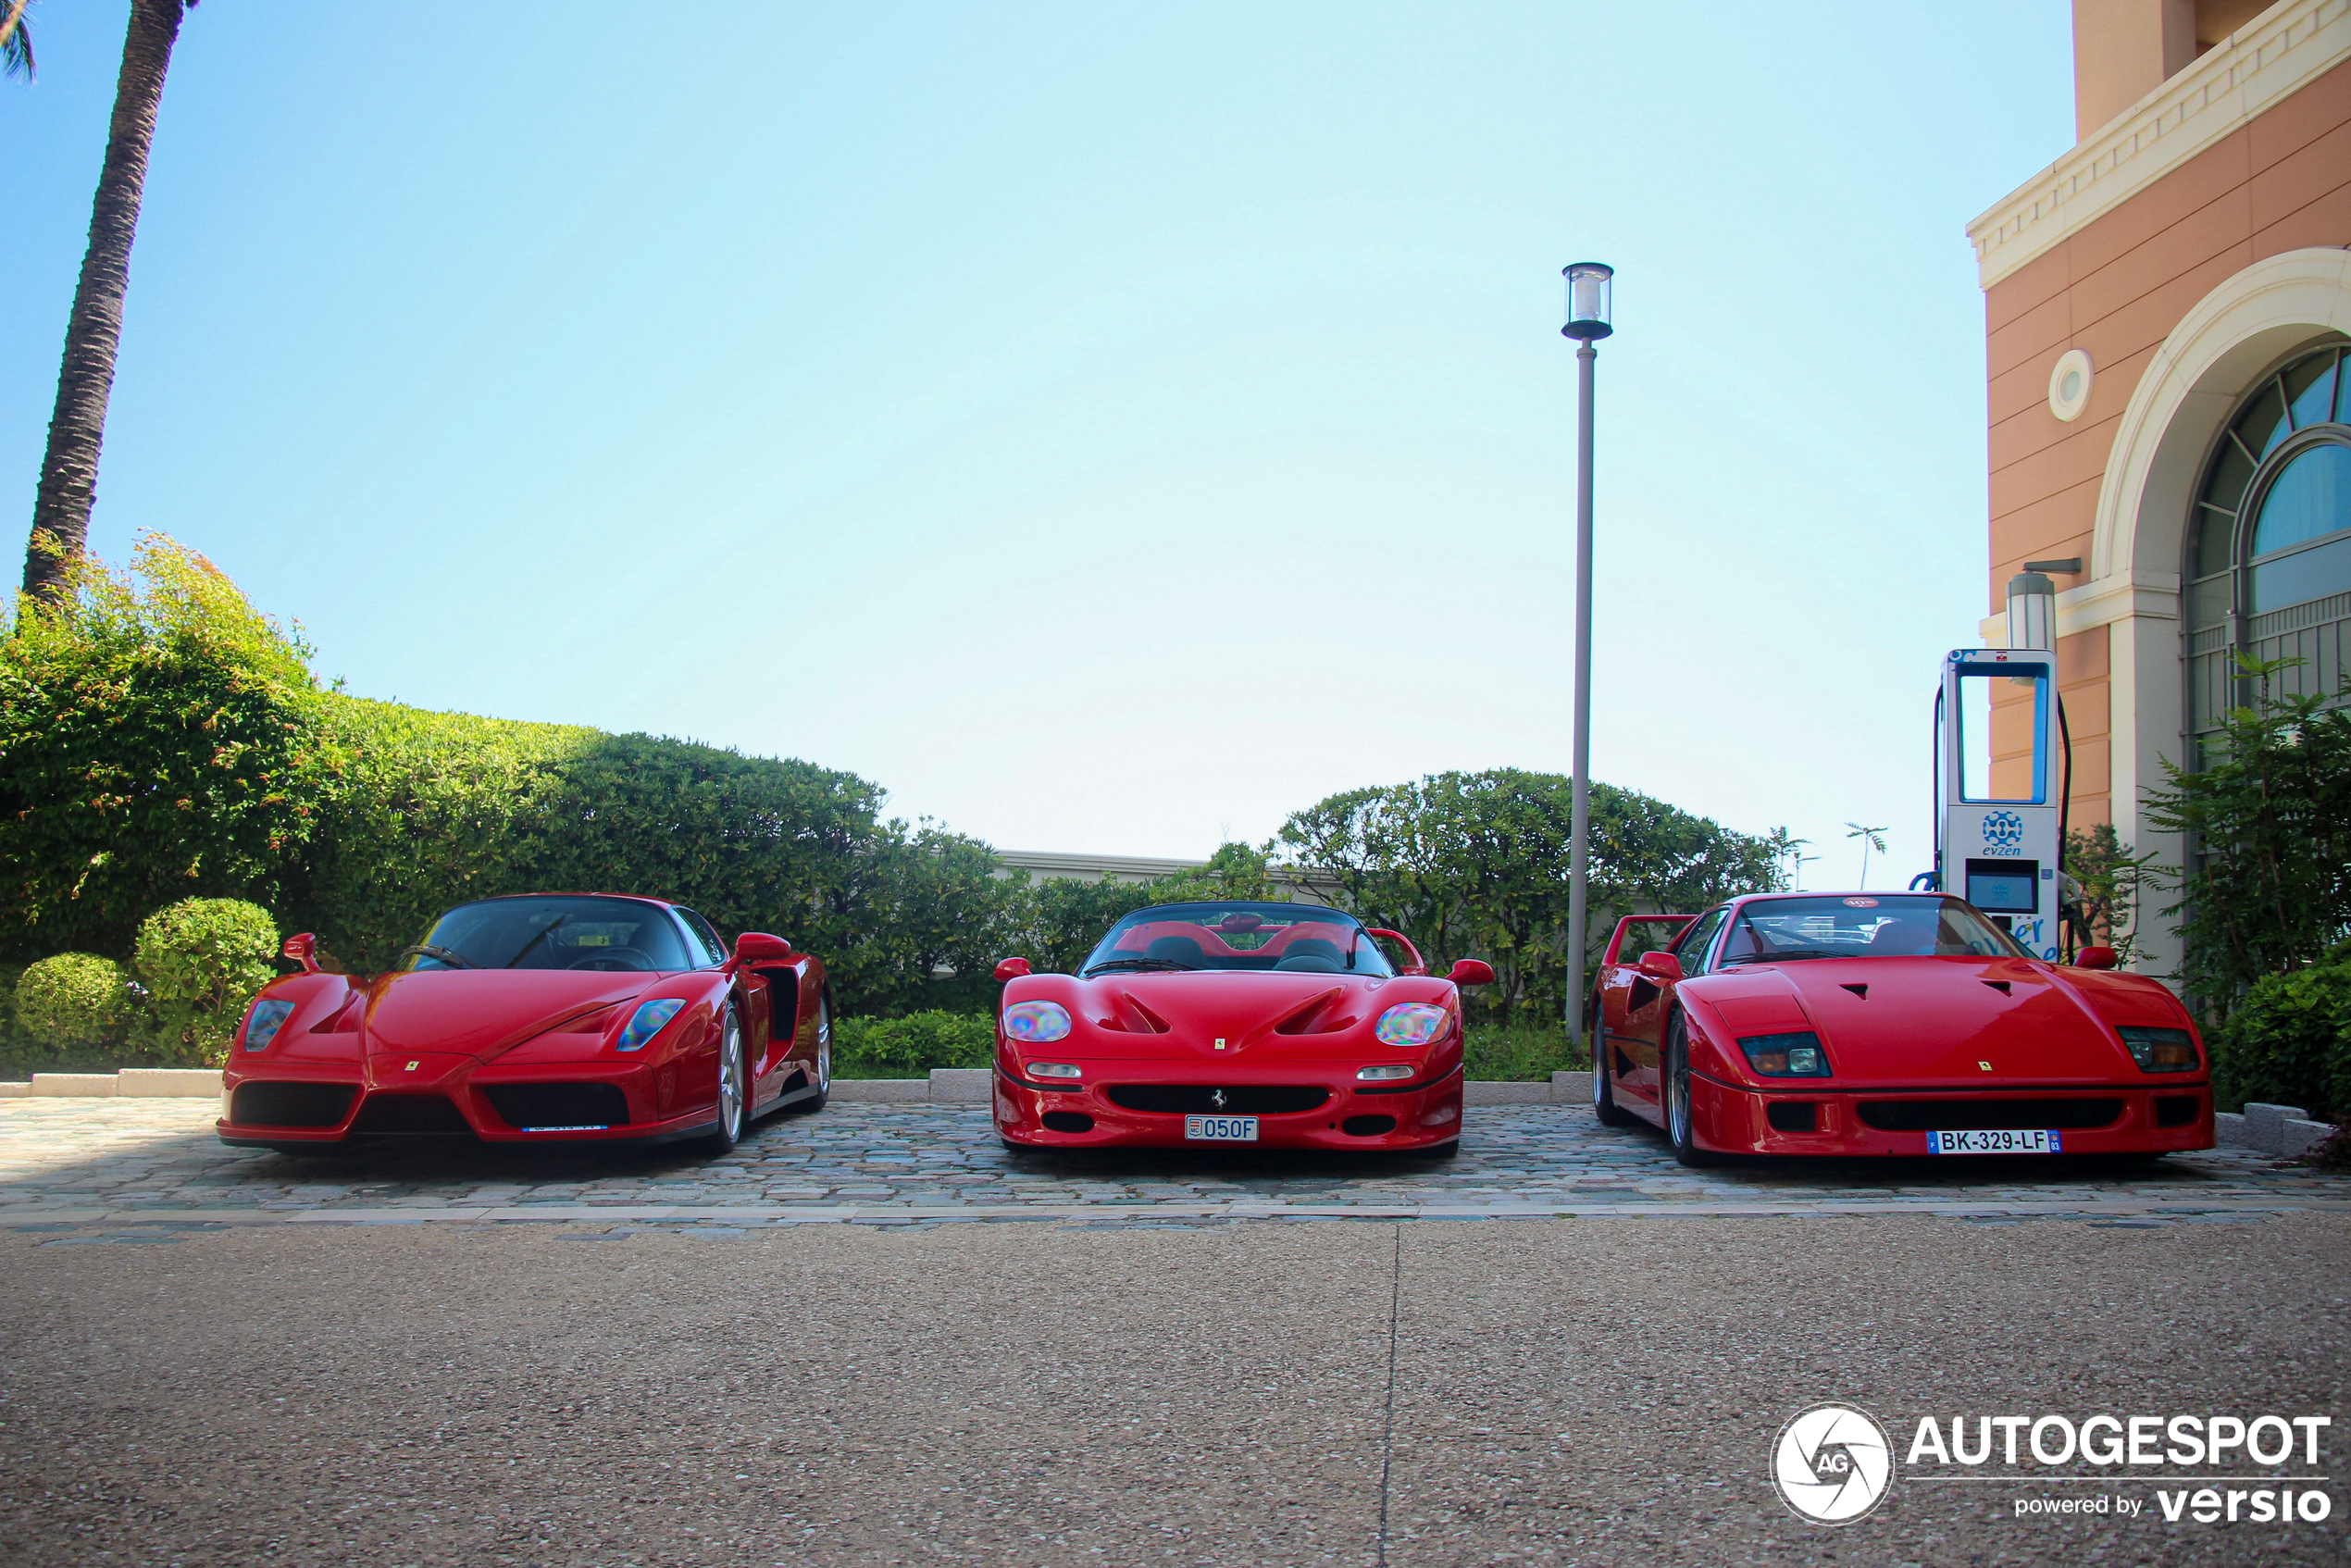 Which of these three Ferrari legends would you choose?